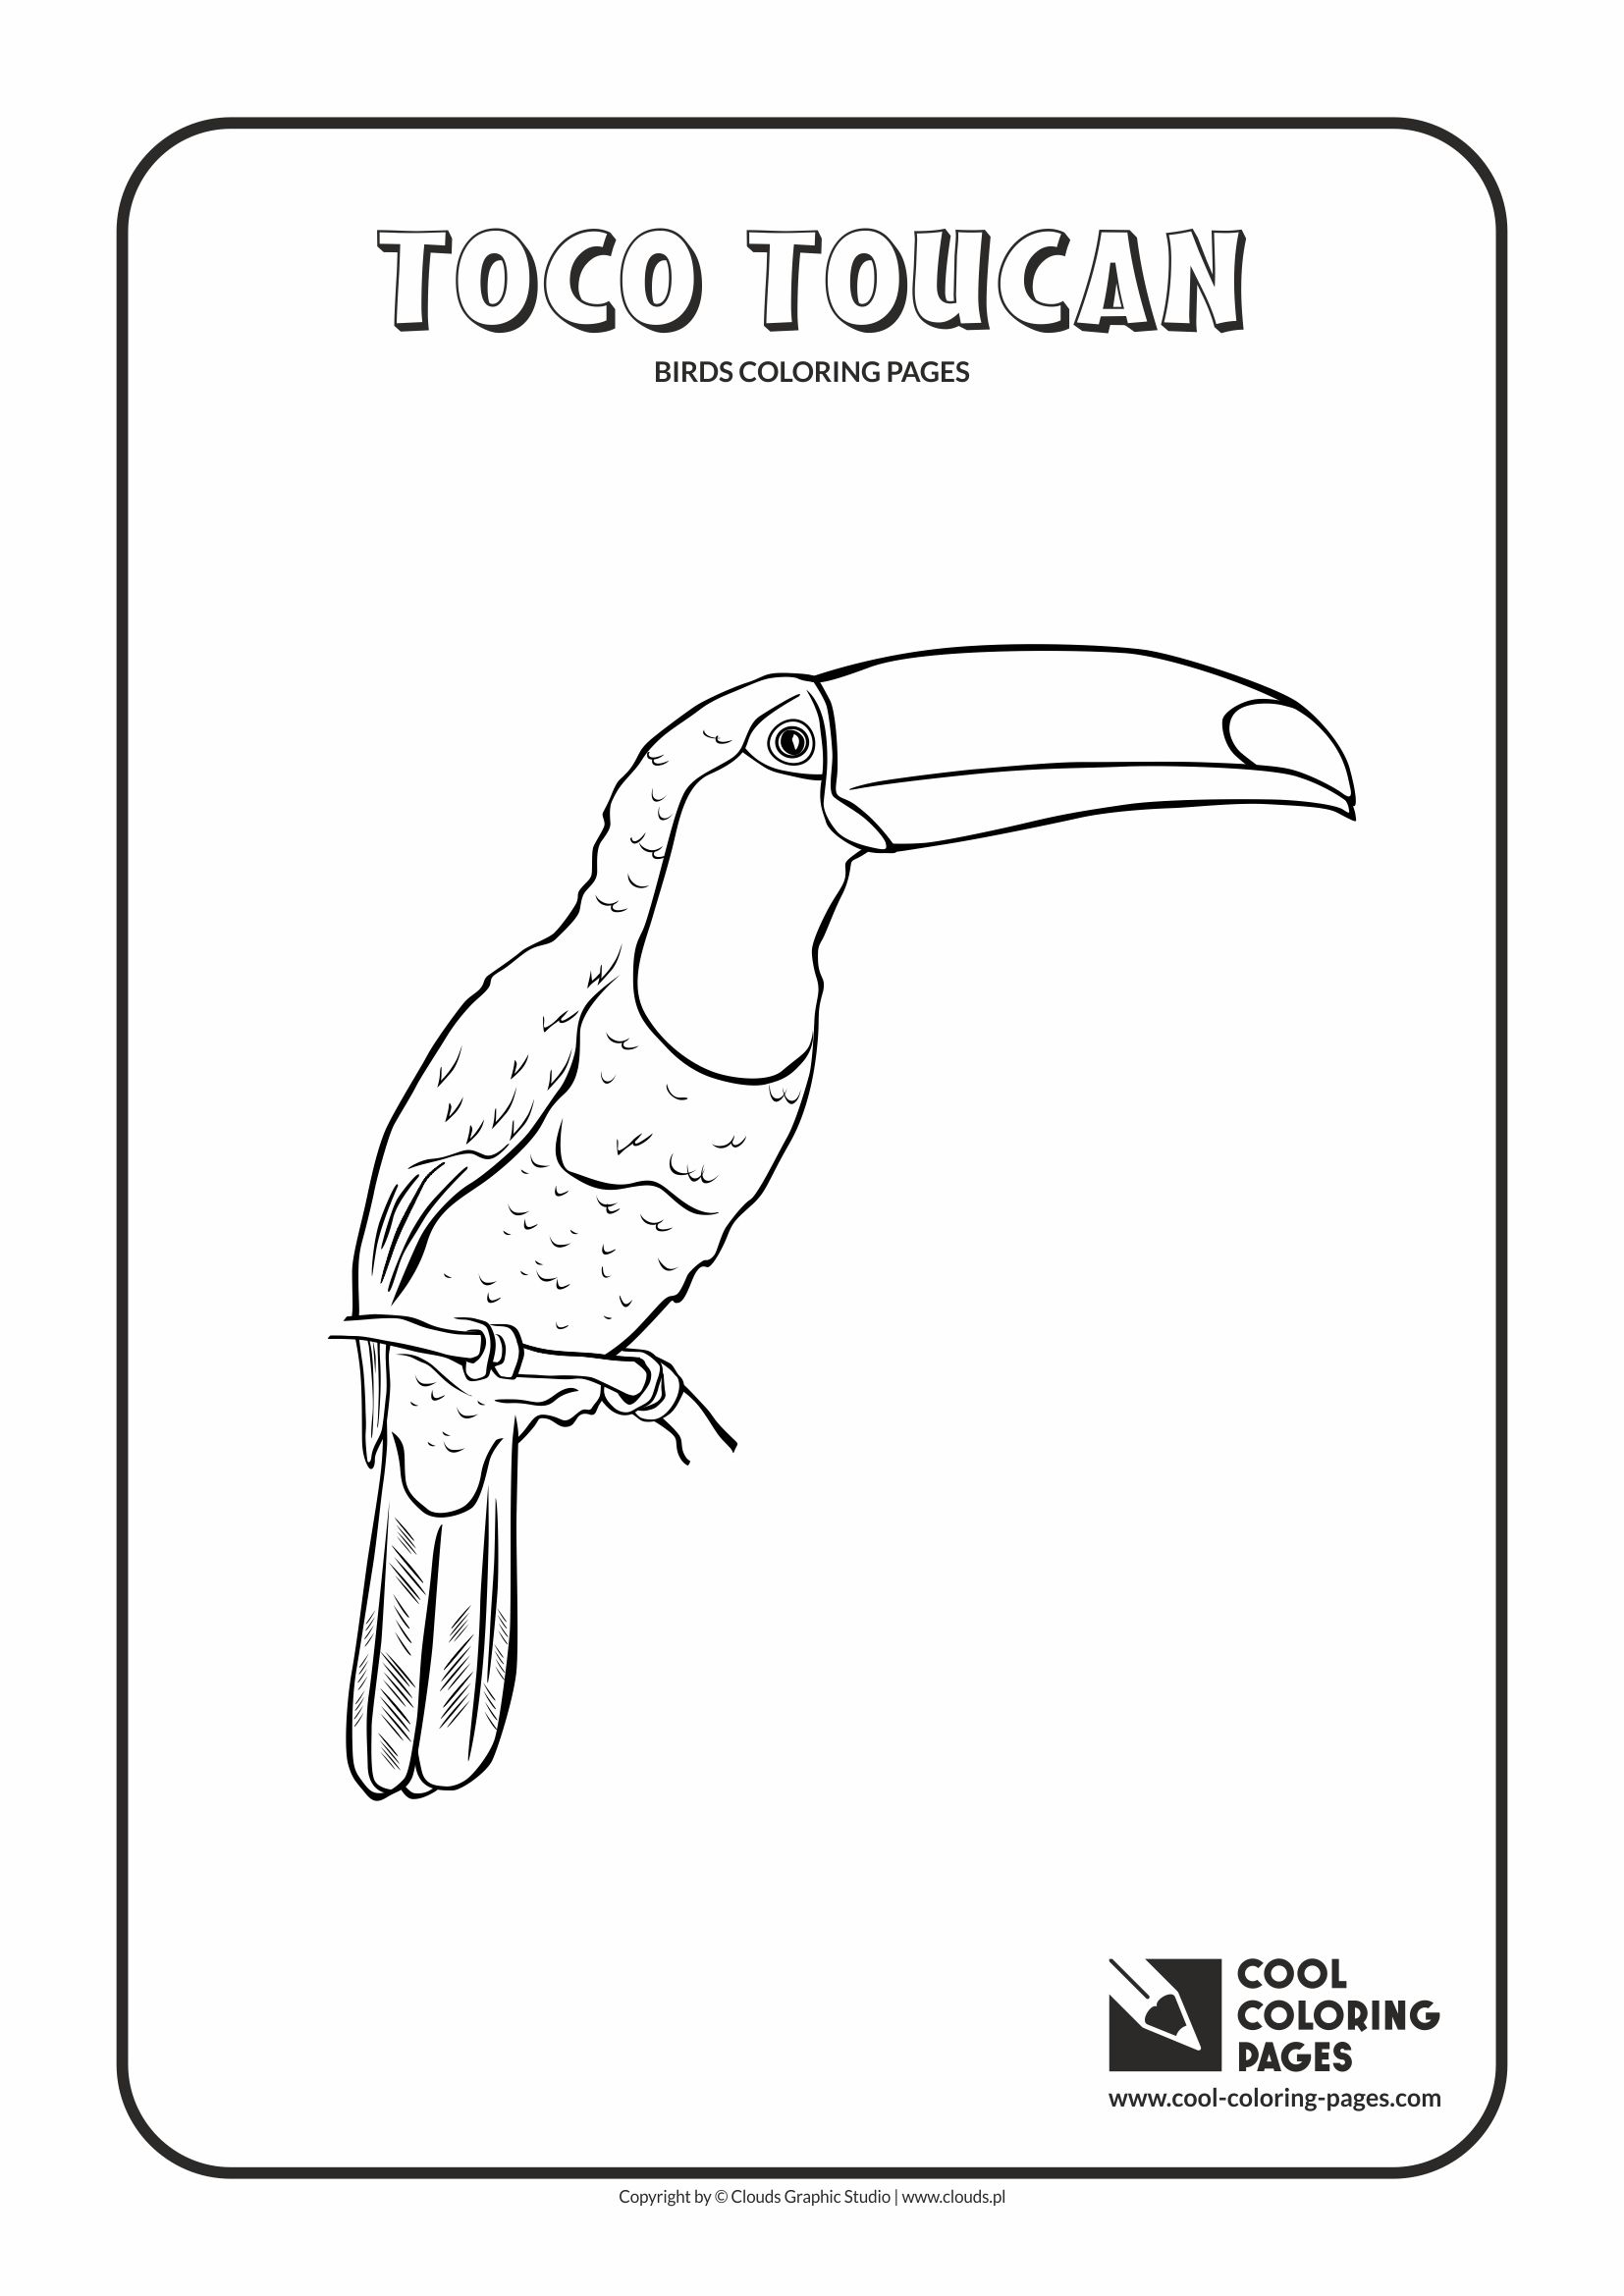 Toco Toucan coloring, Download Toco Toucan coloring for ...